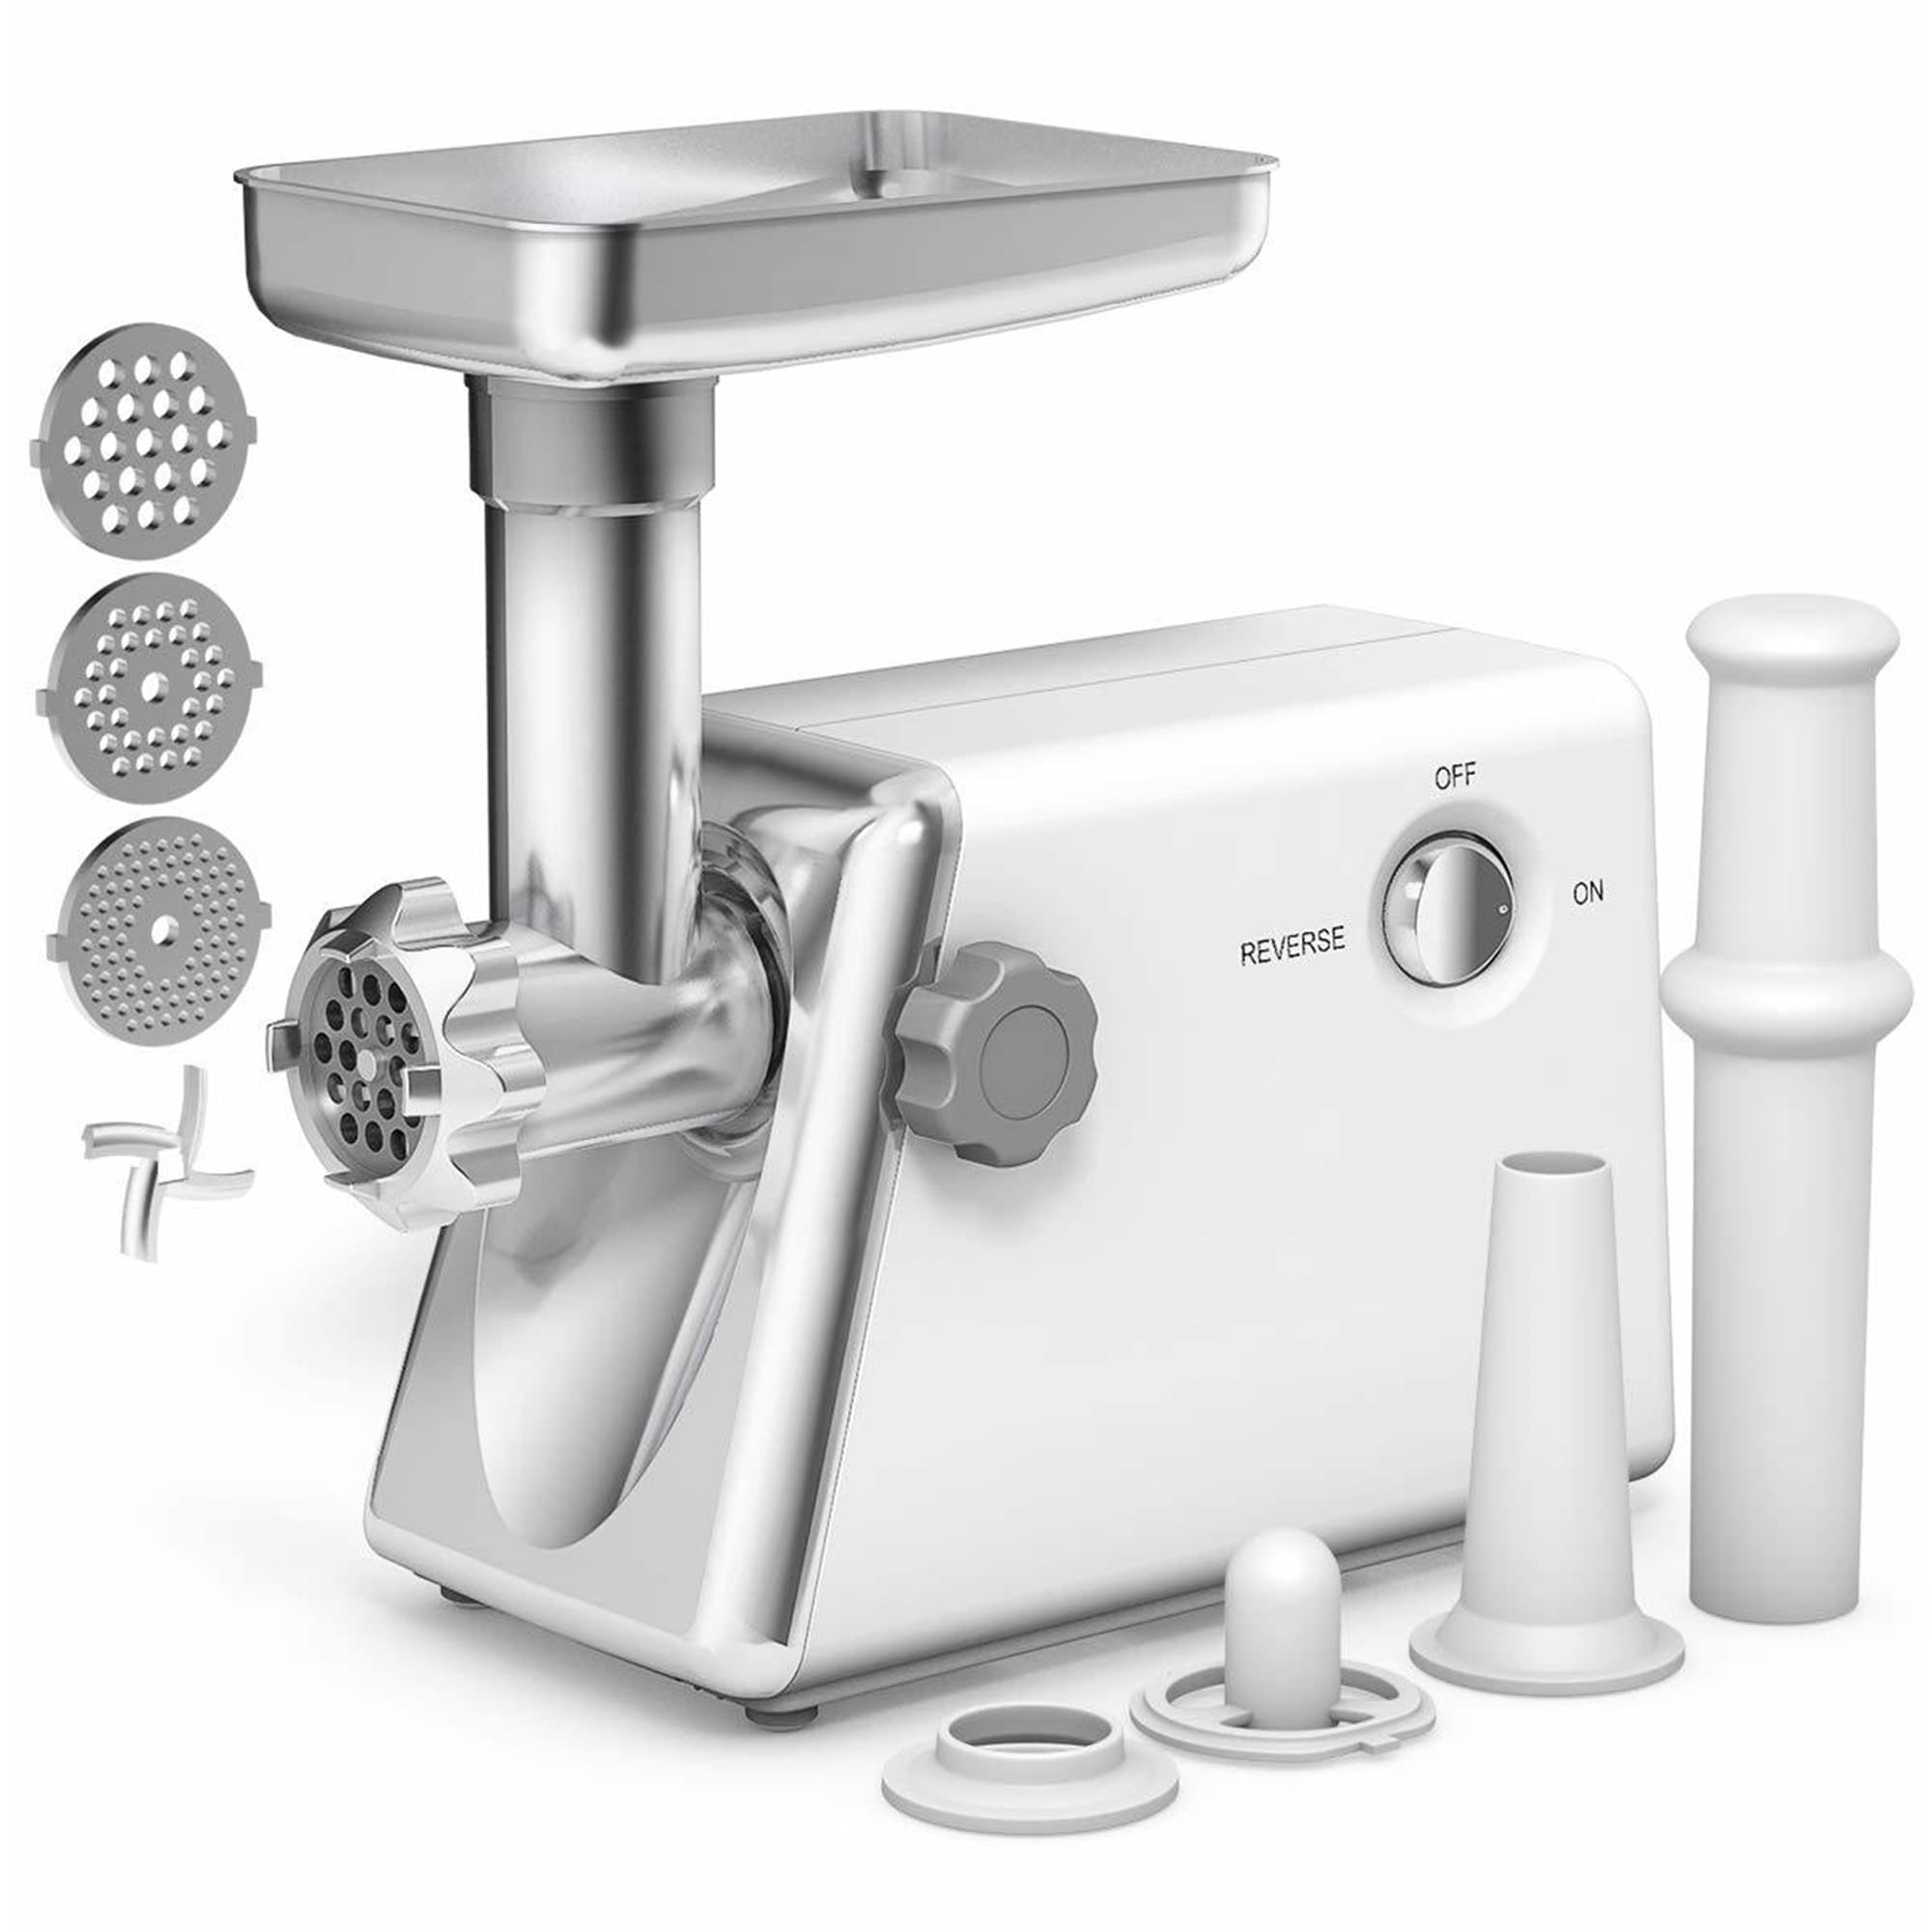 https://ak1.ostkcdn.com/images/products/is/images/direct/605b525633fb9eeed0159366576d8c7f43b9aad4/Stainless-Steel-Electric-Meat-Grinder%2C-Sausage-Stuffer-Kit-for-Home.jpg